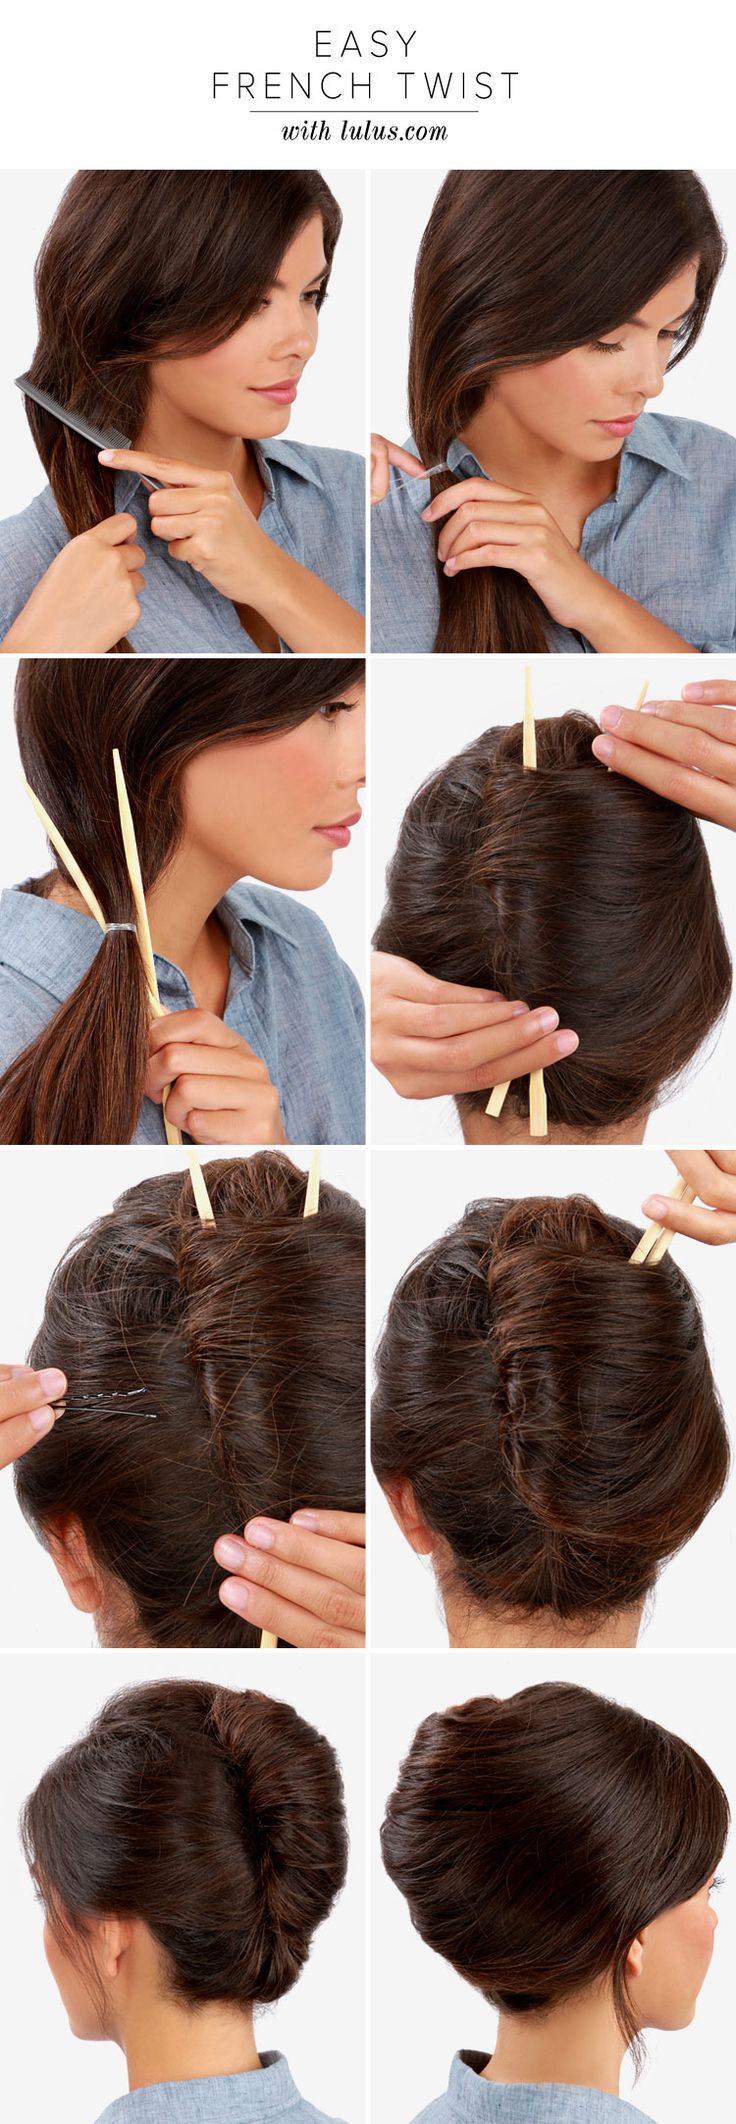 Simple French twist updo